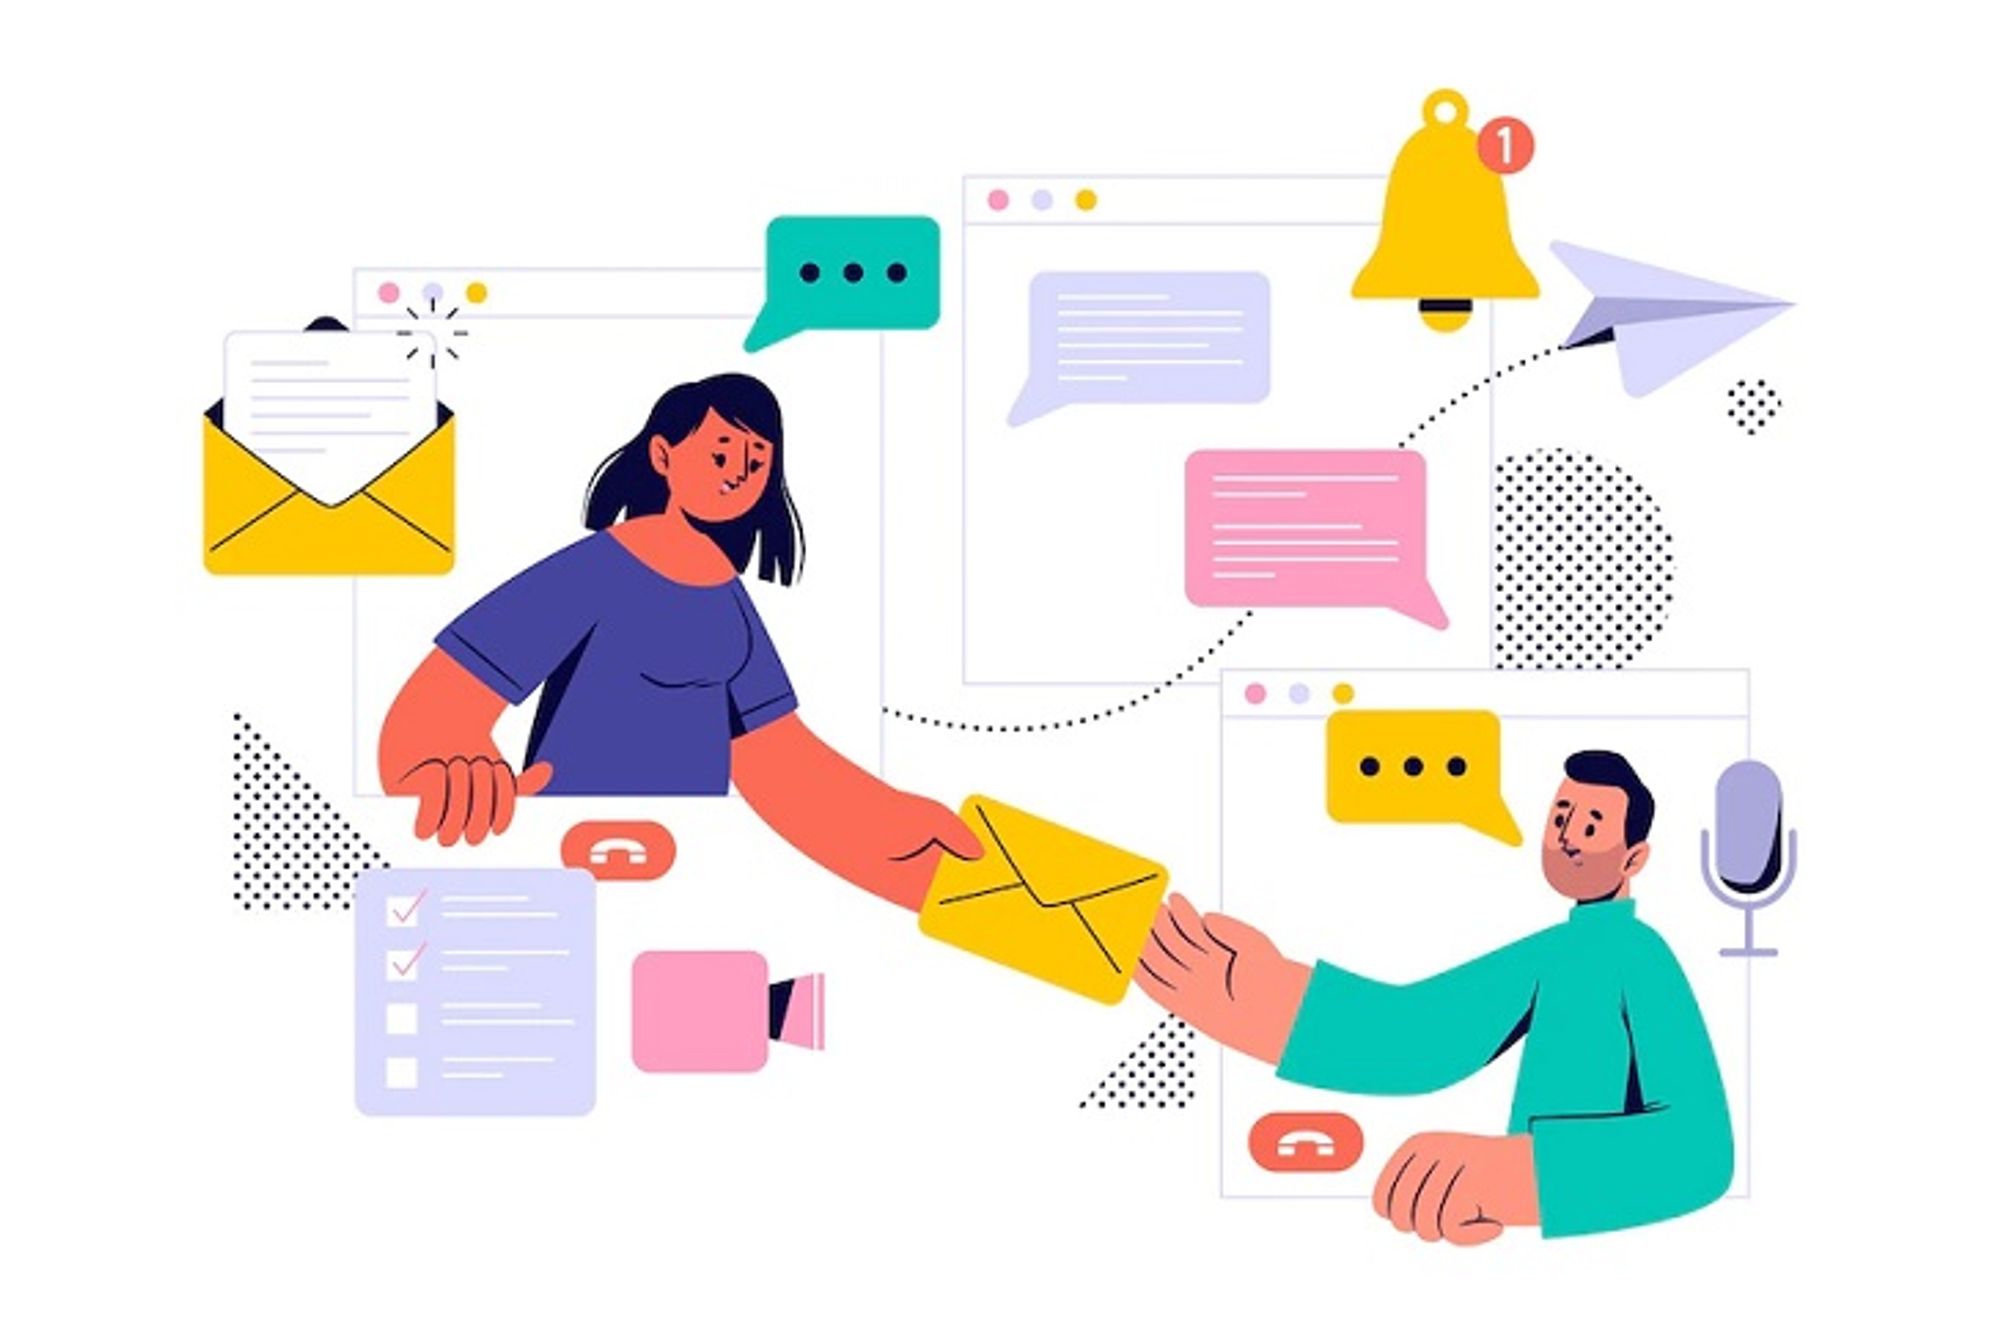 people-communicating-through-email-illustration